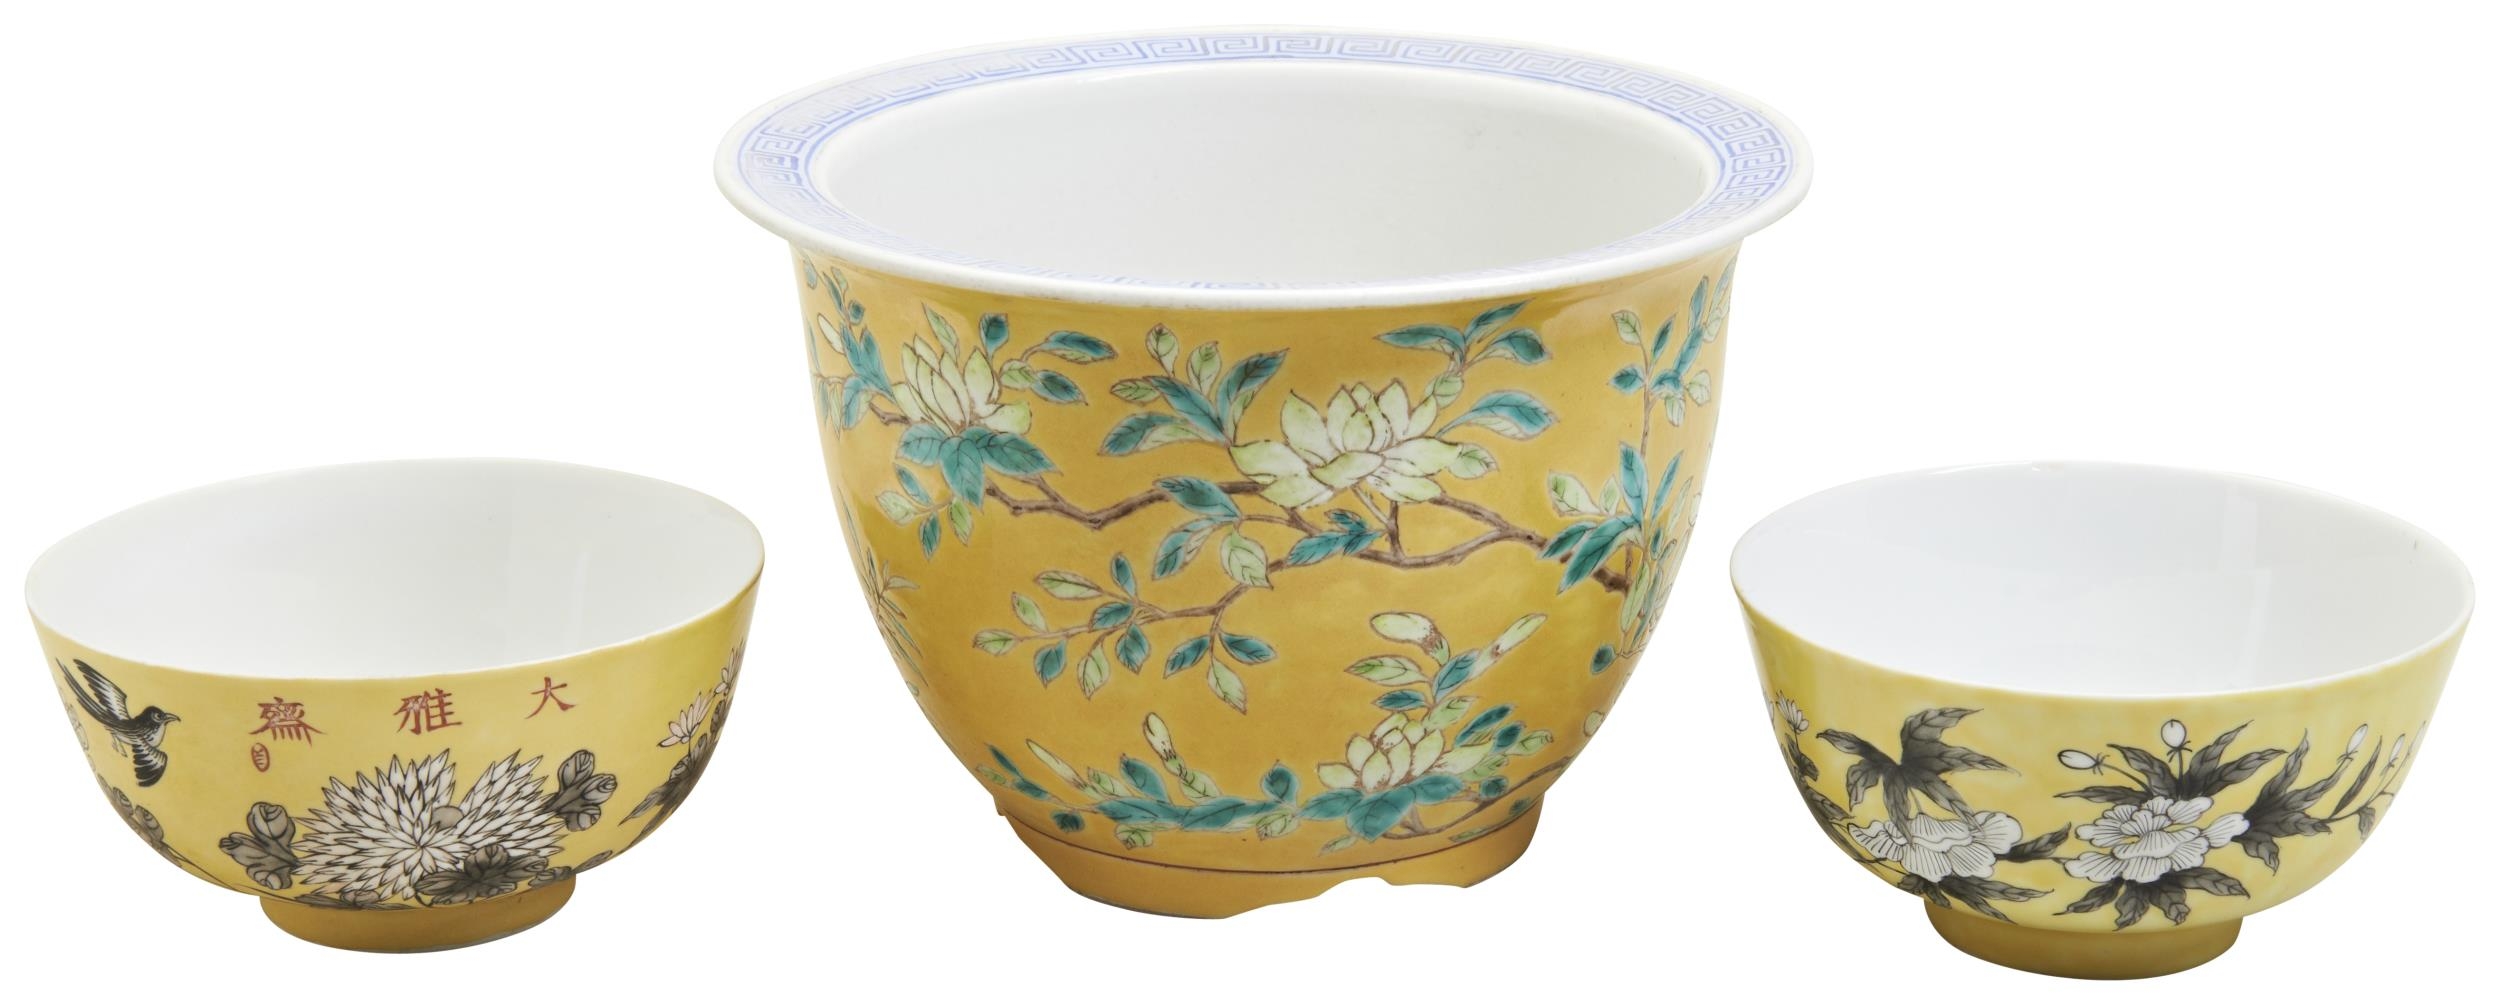 A PAIR OF FAMILLE ROSE YELLOW GROUND BOWL AND A JARDINIERE  19TH/20TH CENTURY  two yellow ground